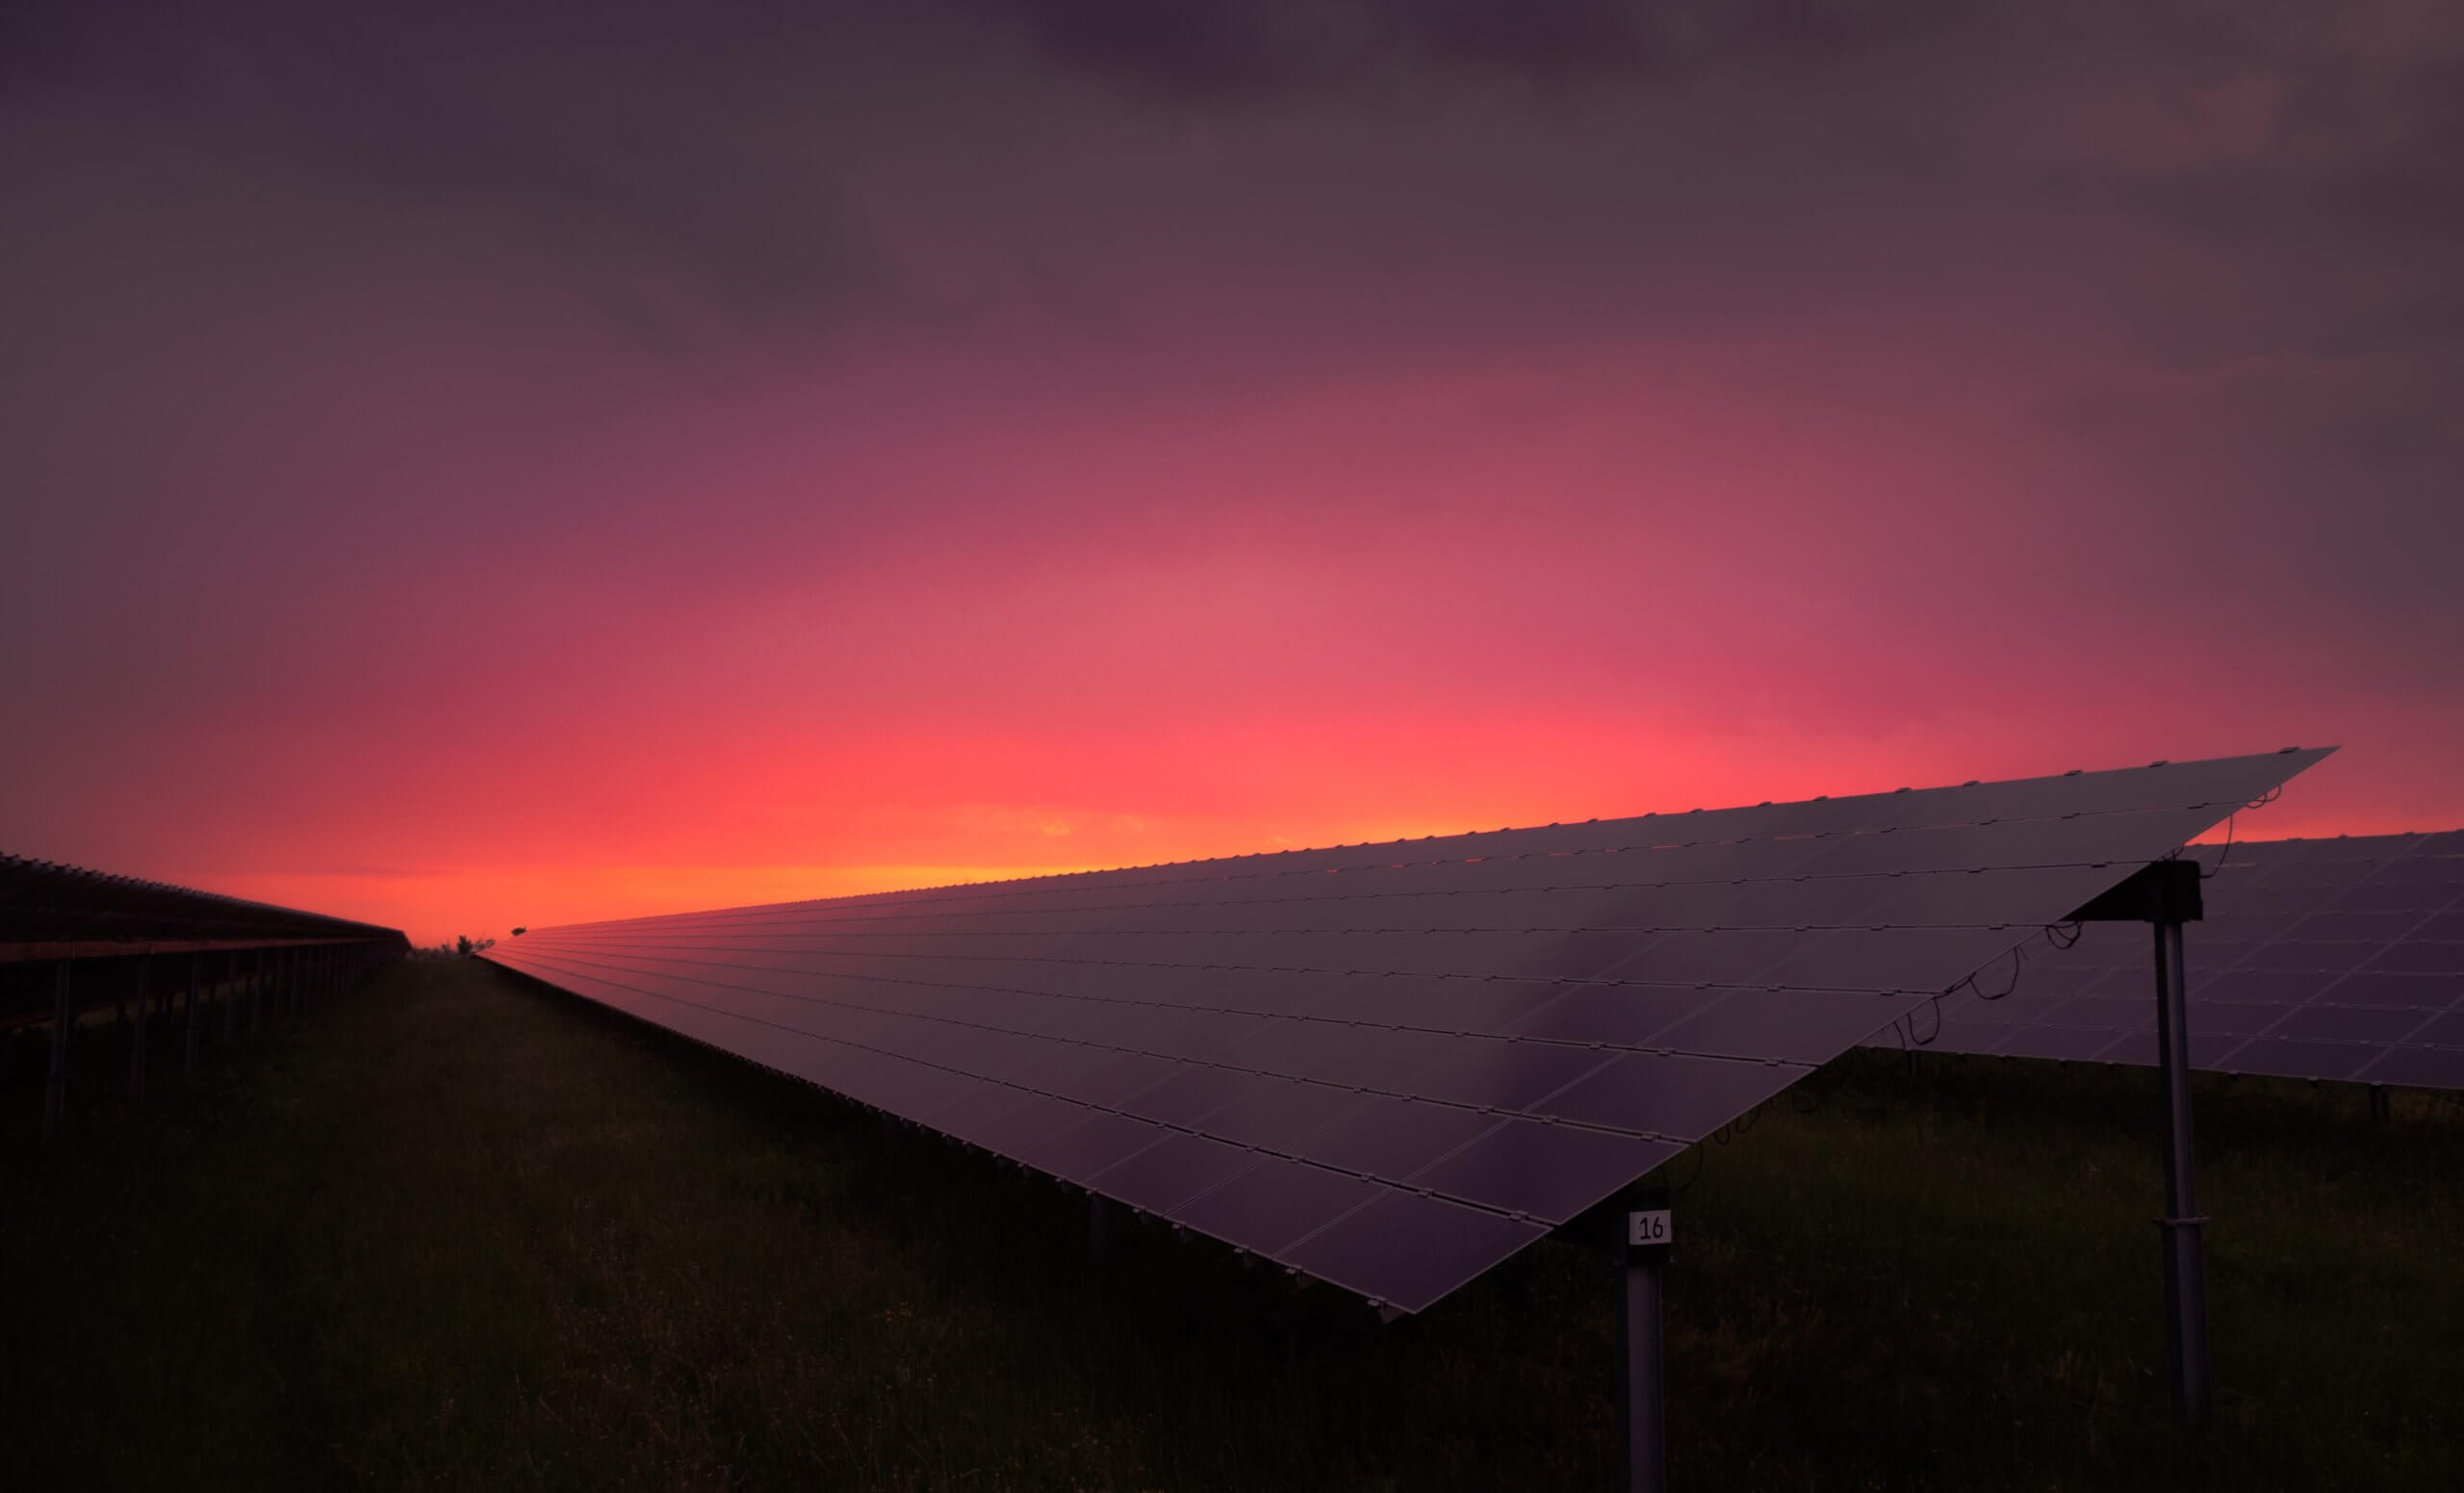 A solar panel at dusk illuminated by the colors of the sunset.